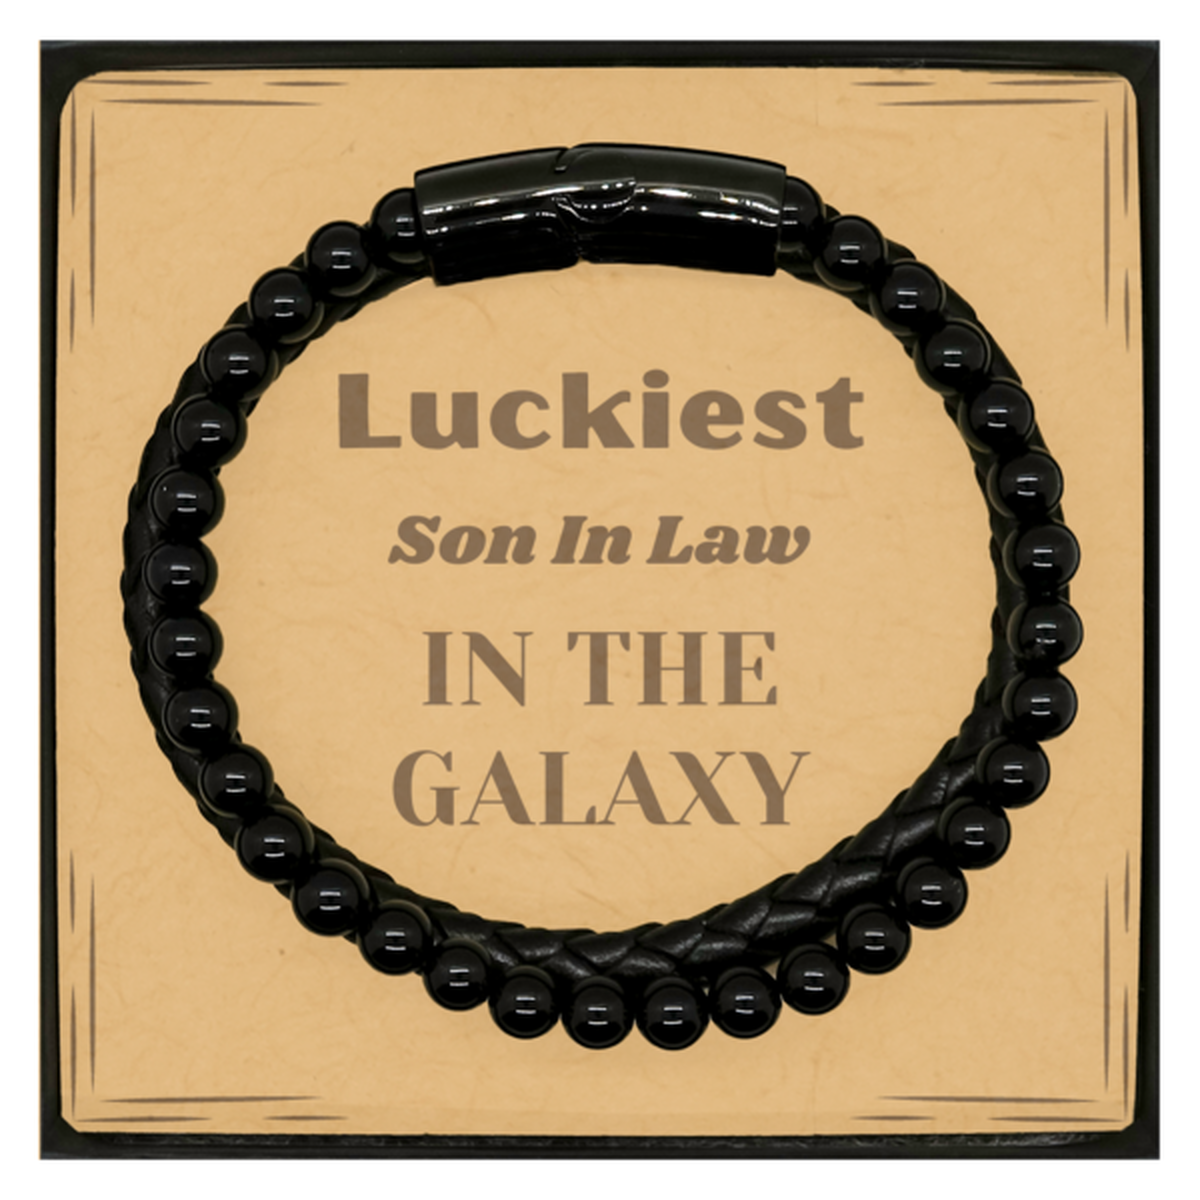 Luckiest Son In Law in the Galaxy, To My Son In Law Message Card Gifts, Christmas Son In Law Stone Leather Bracelets Gifts, X-mas Birthday Unique Gifts For Son In Law Men Women